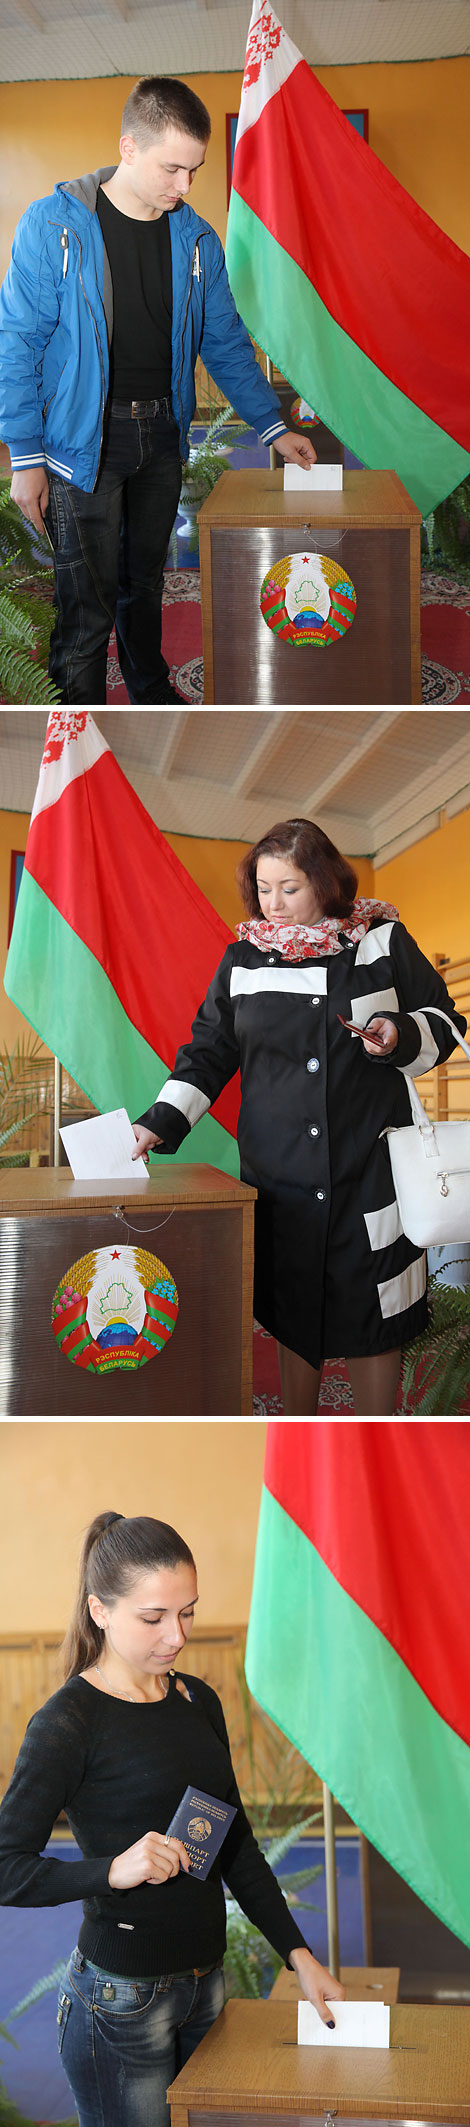 Polling station No. 11 in Polotsk